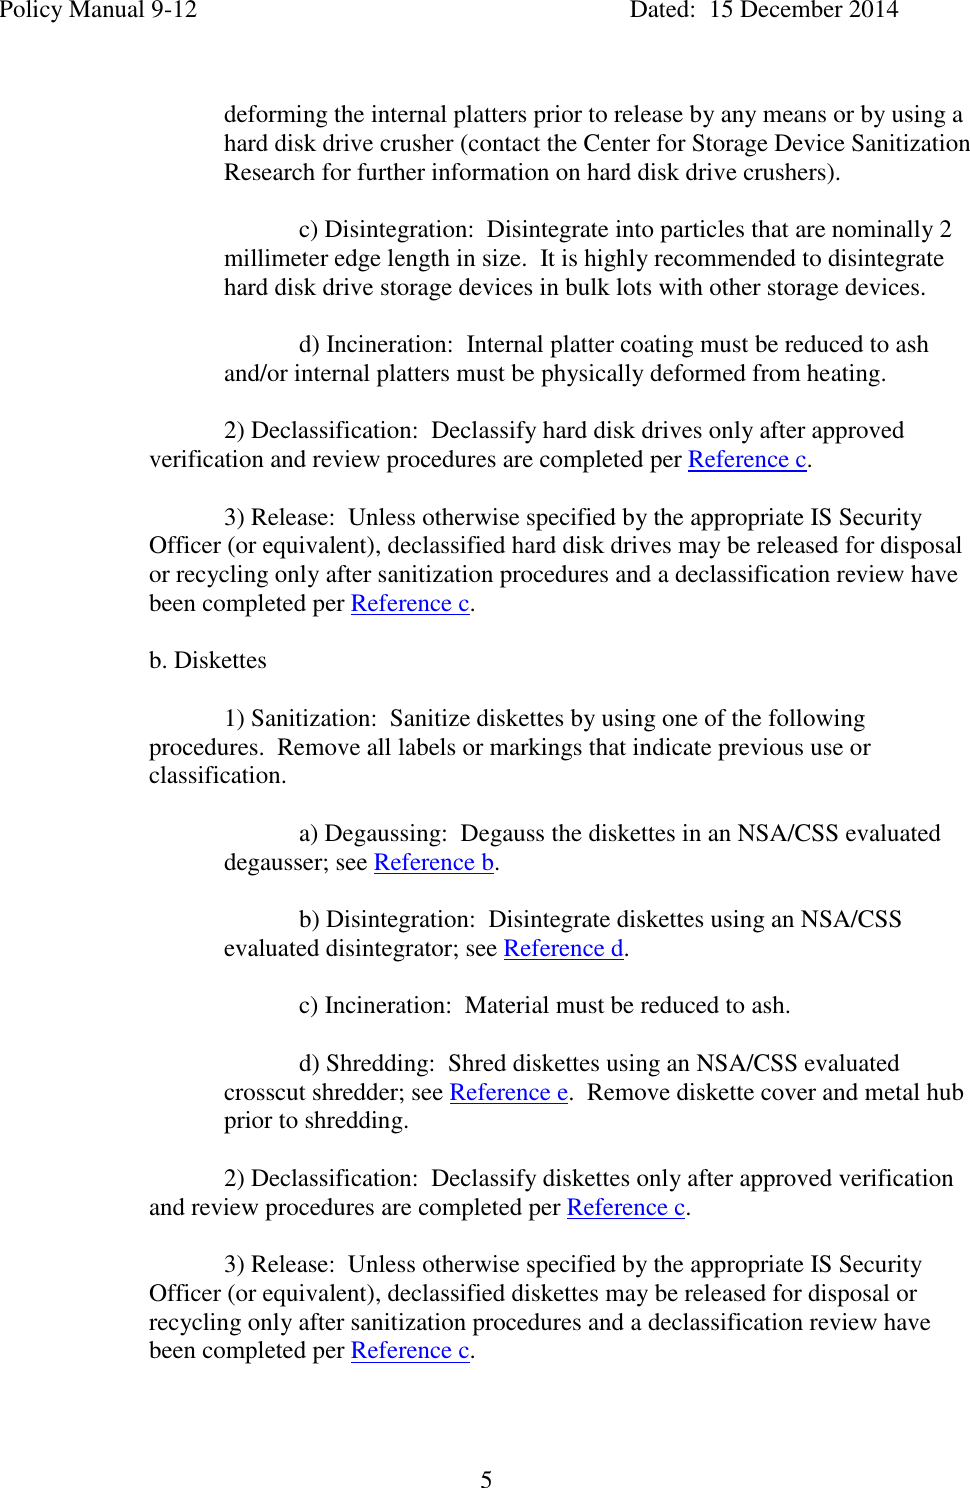 Page 5 of 10 - Storage-device-declassification-manual